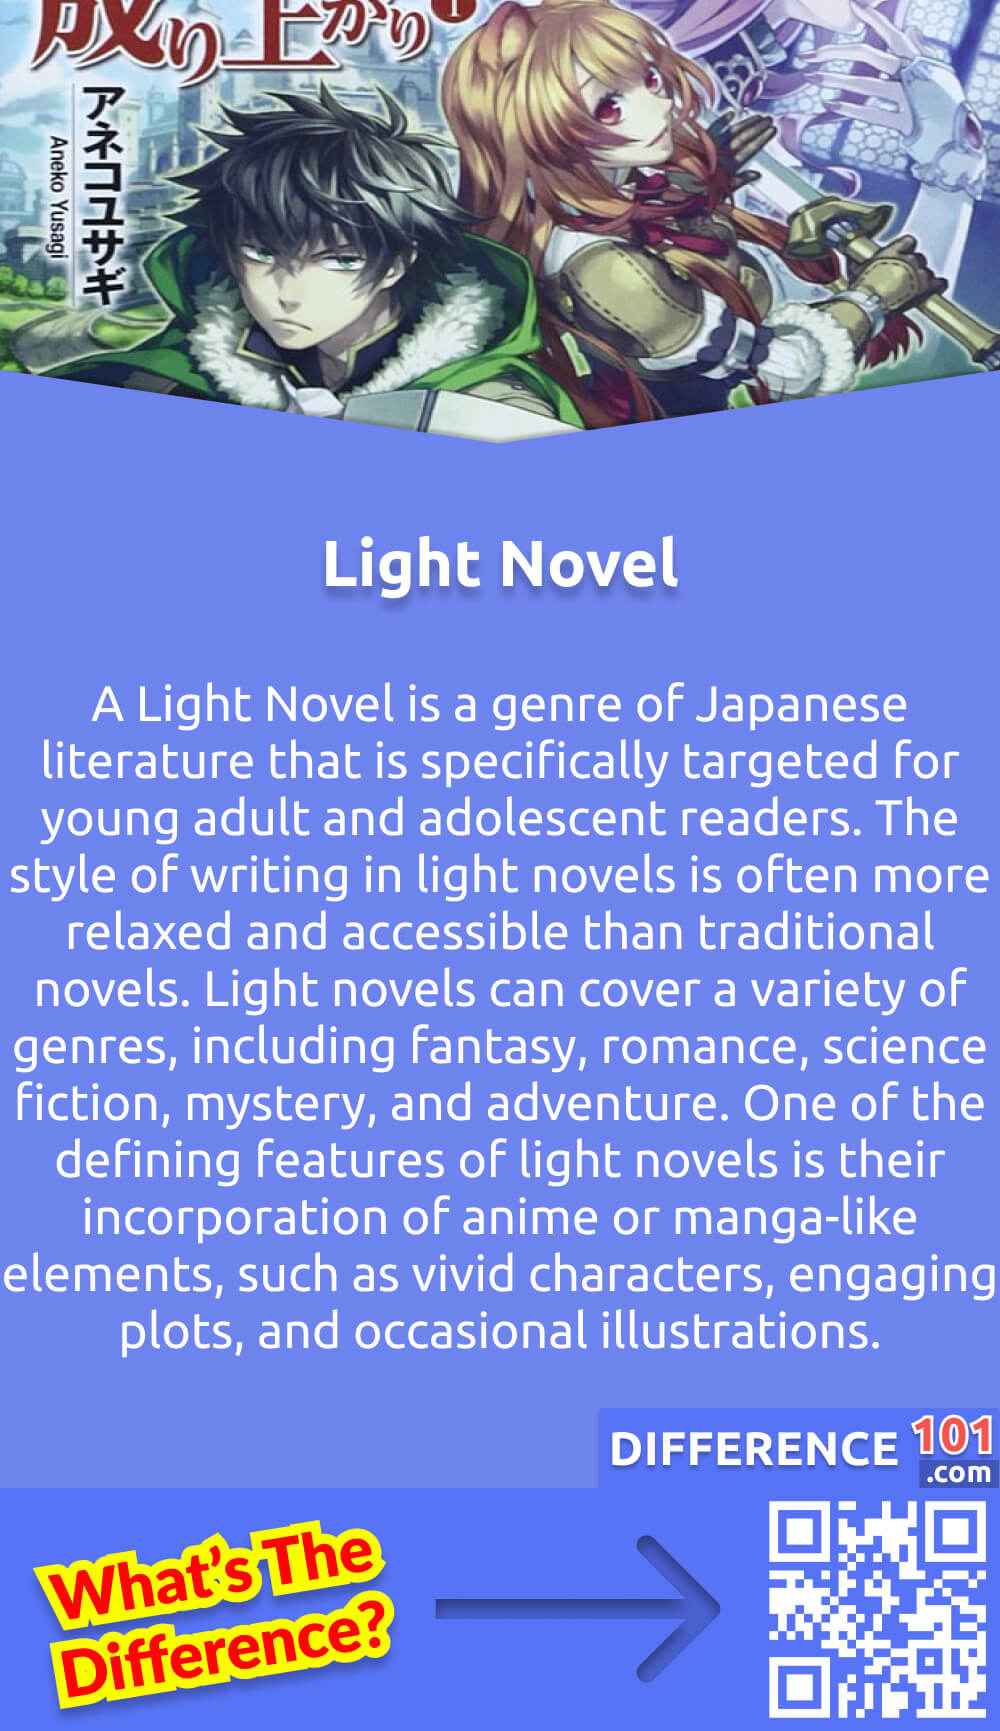 What Is Light Novel? A Light Novel is a genre of Japanese literature that is specifically targeted for young adult and adolescent readers. The style of writing in light novels is often more relaxed and accessible than traditional novels, making them a popular choice among readers seeking engaging and immersive storytelling. Light novels can cover a variety of genres, including fantasy, romance, science fiction, mystery, and adventure. One of the defining features of light novels is their incorporation of anime or manga-like elements, such as vivid characters, engaging plots, and occasional illustrations, which further enhance the reading experience. These novels are typically serialized in magazines, online platforms, or released as standalone volumes.